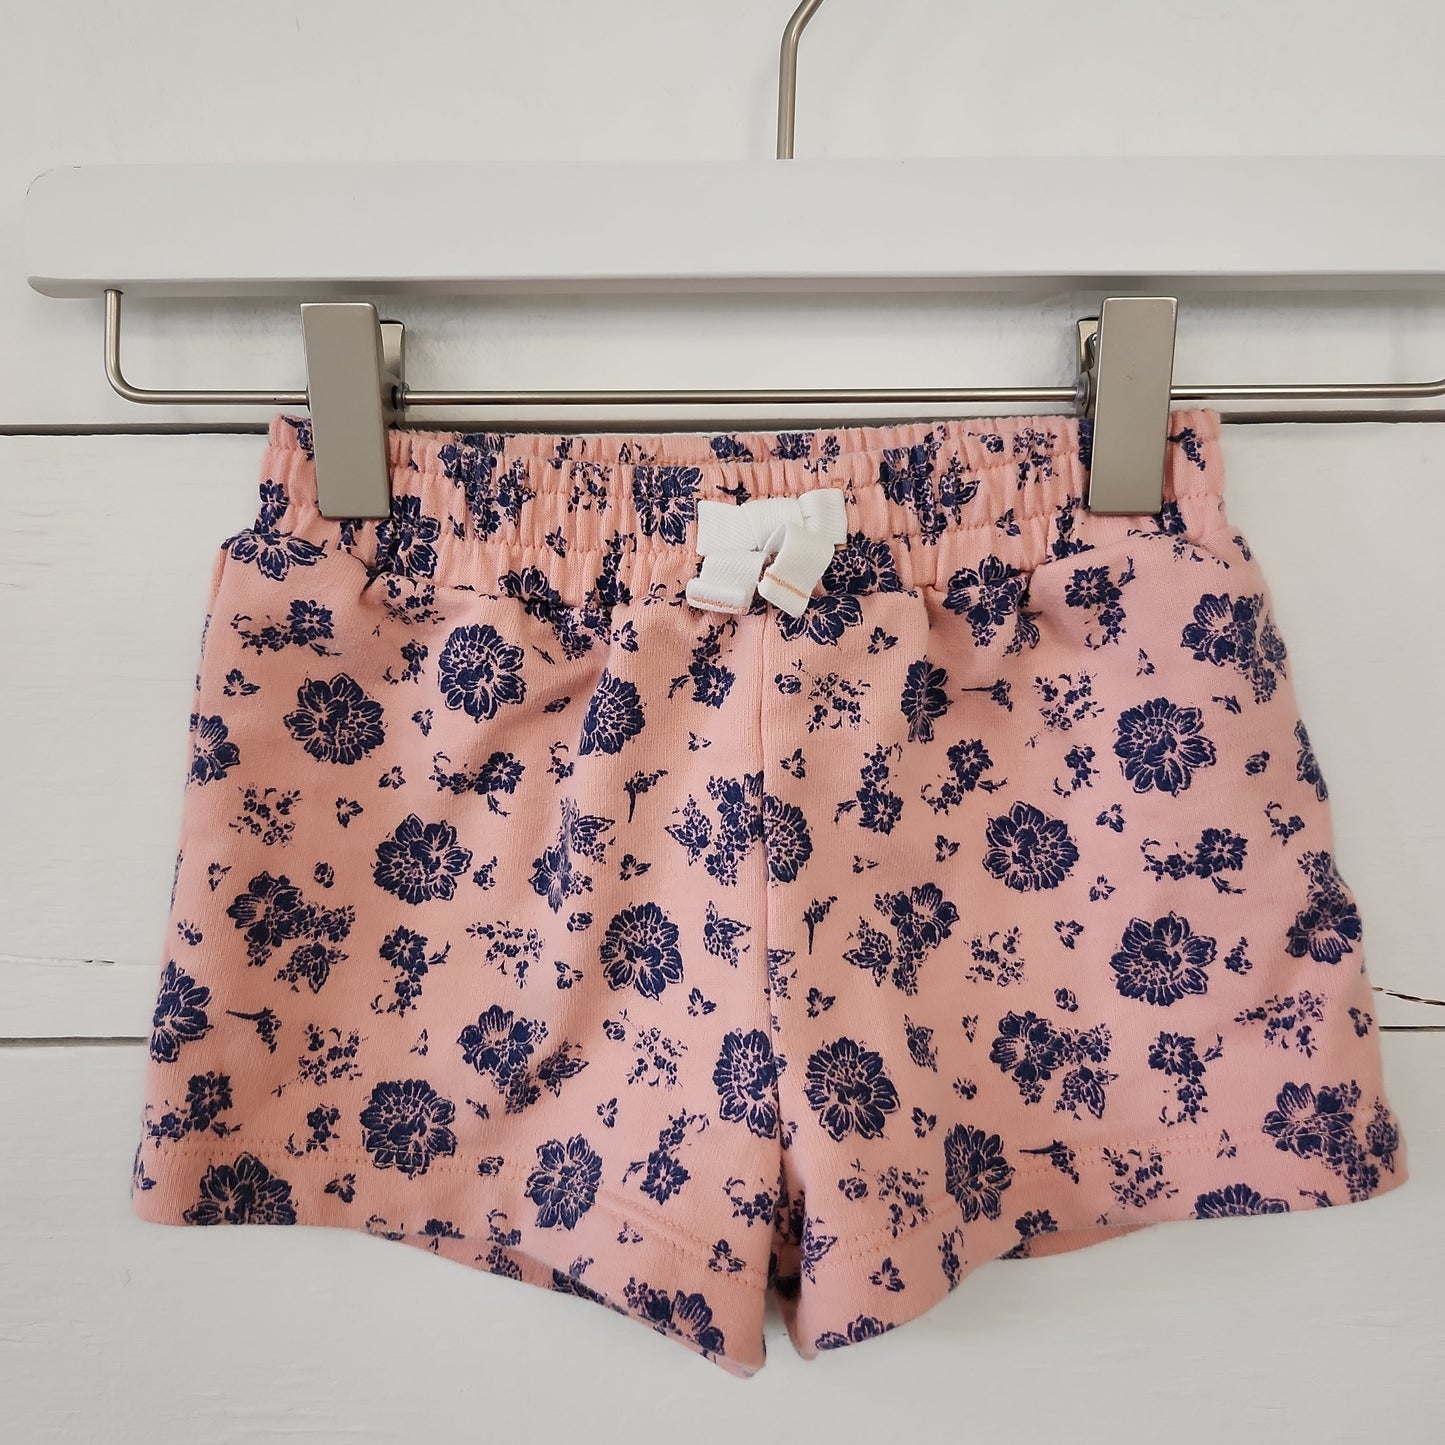 Size 3t | Lucky Brand Shorts | Secondhand